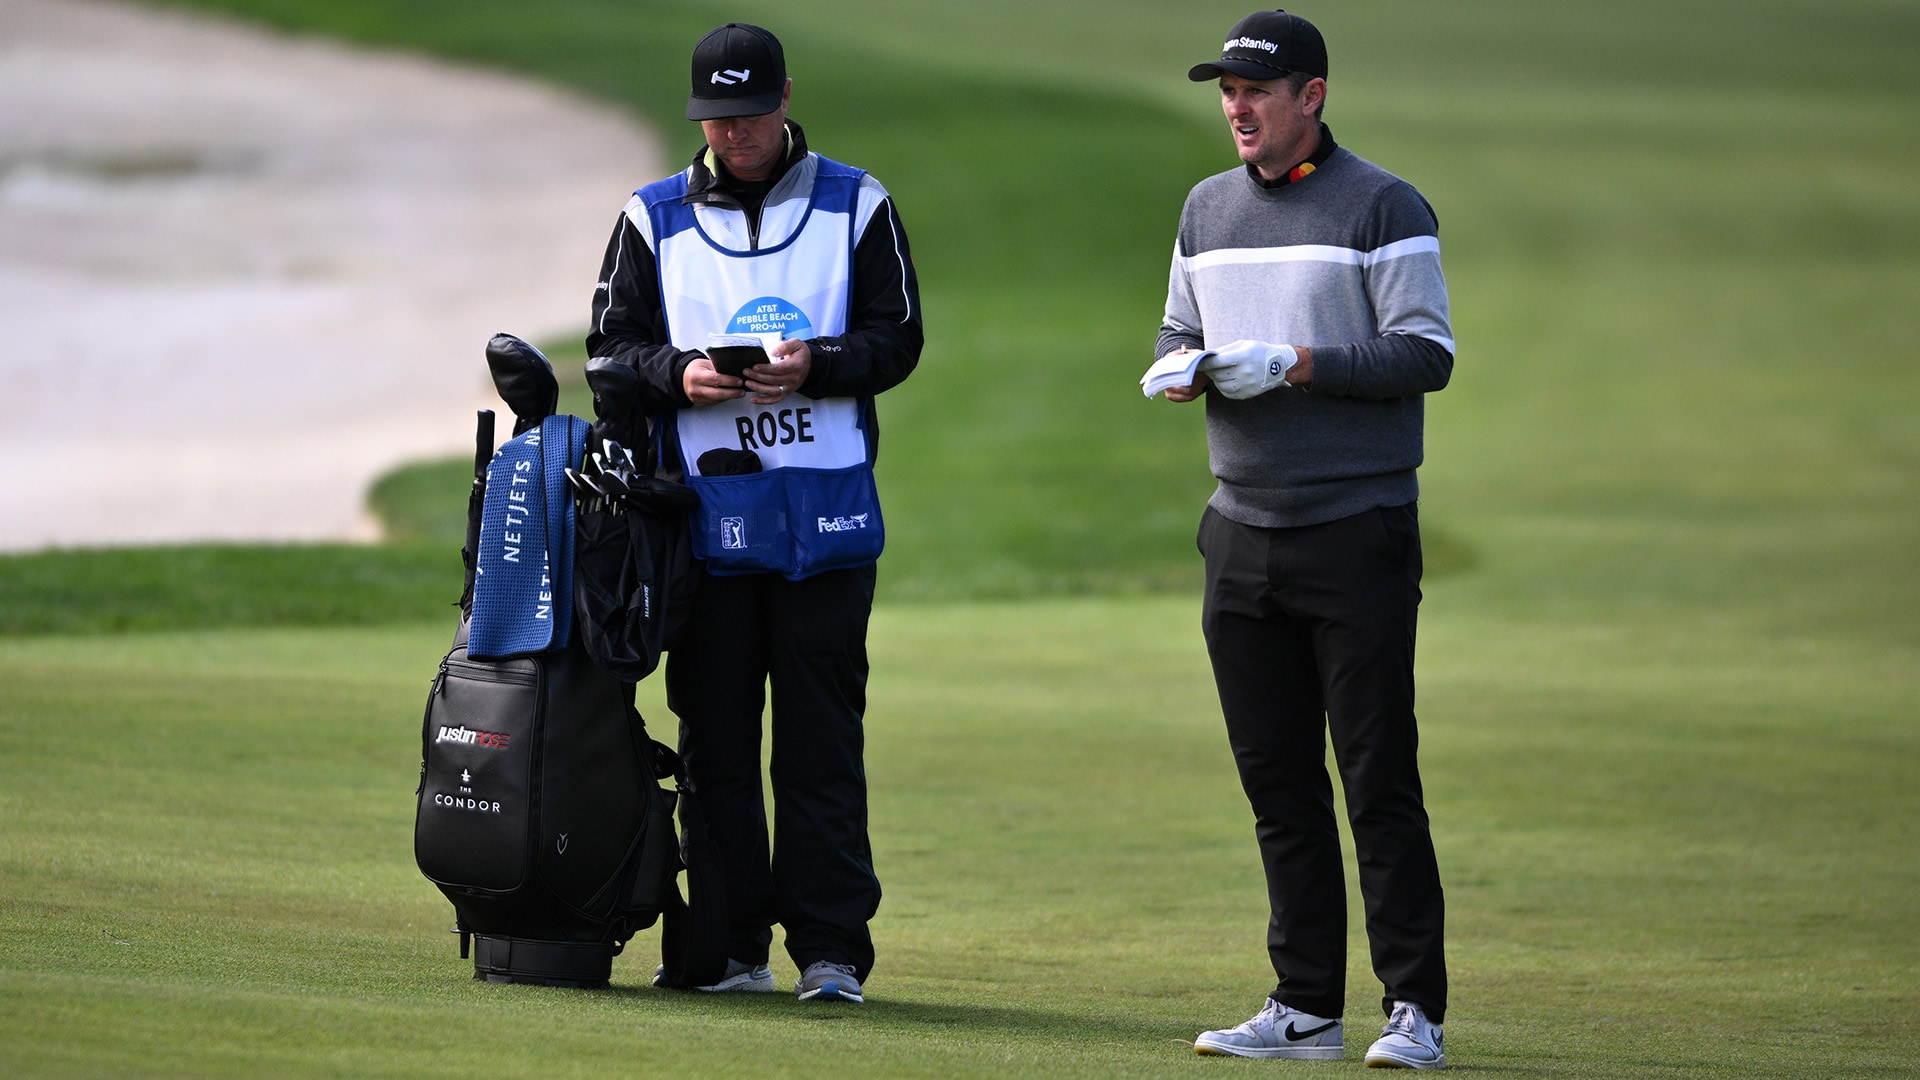 Winner’s bag: Justin Rose rides last second iron change to AT&T Pebble Beach Pro-Am win